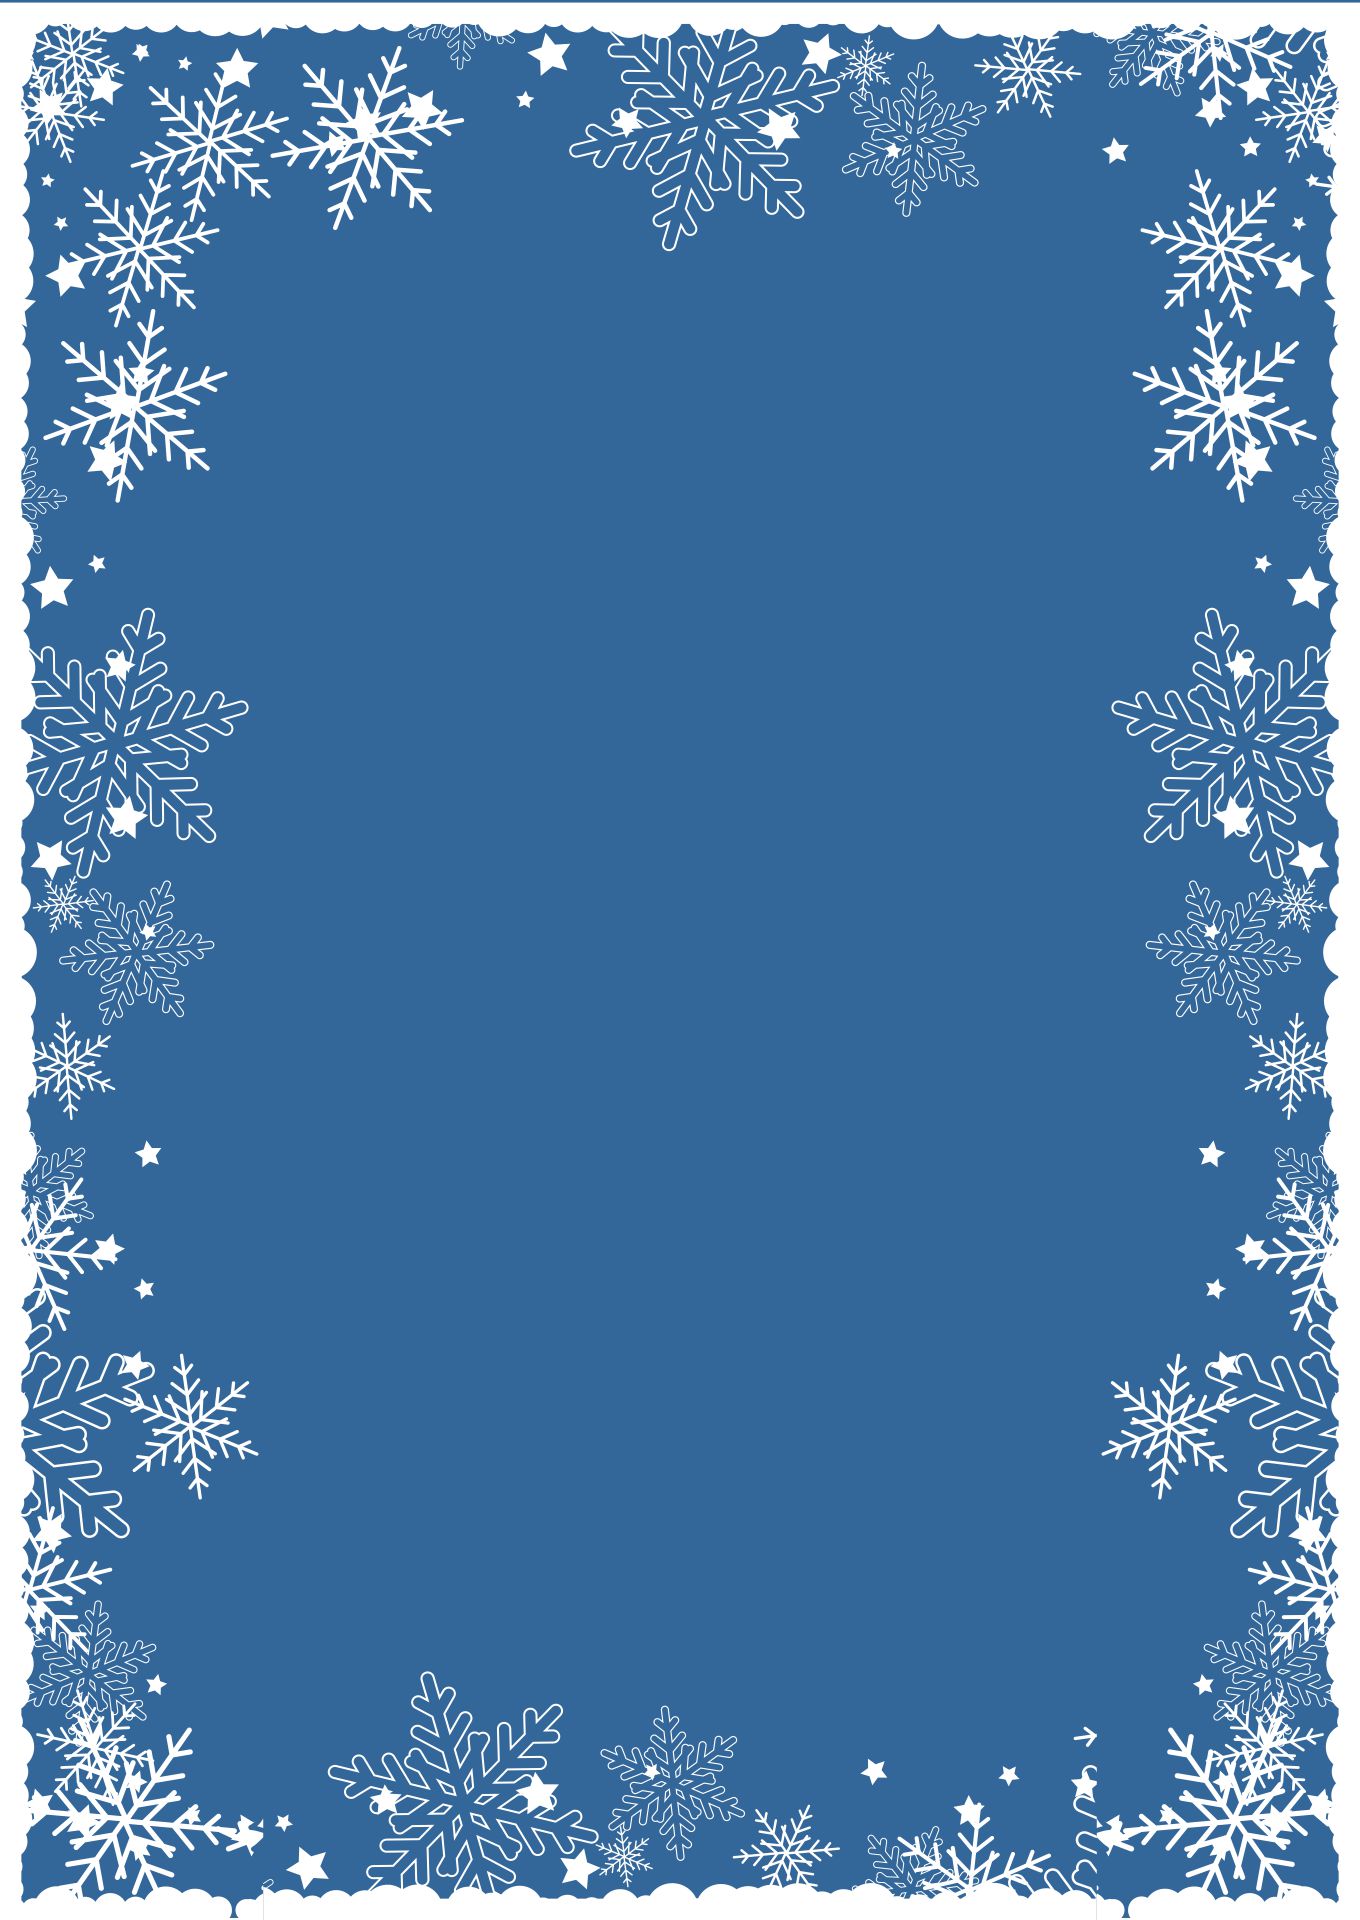 6 Best Images of Free Printable Christmas Stationary Borders - Free ...